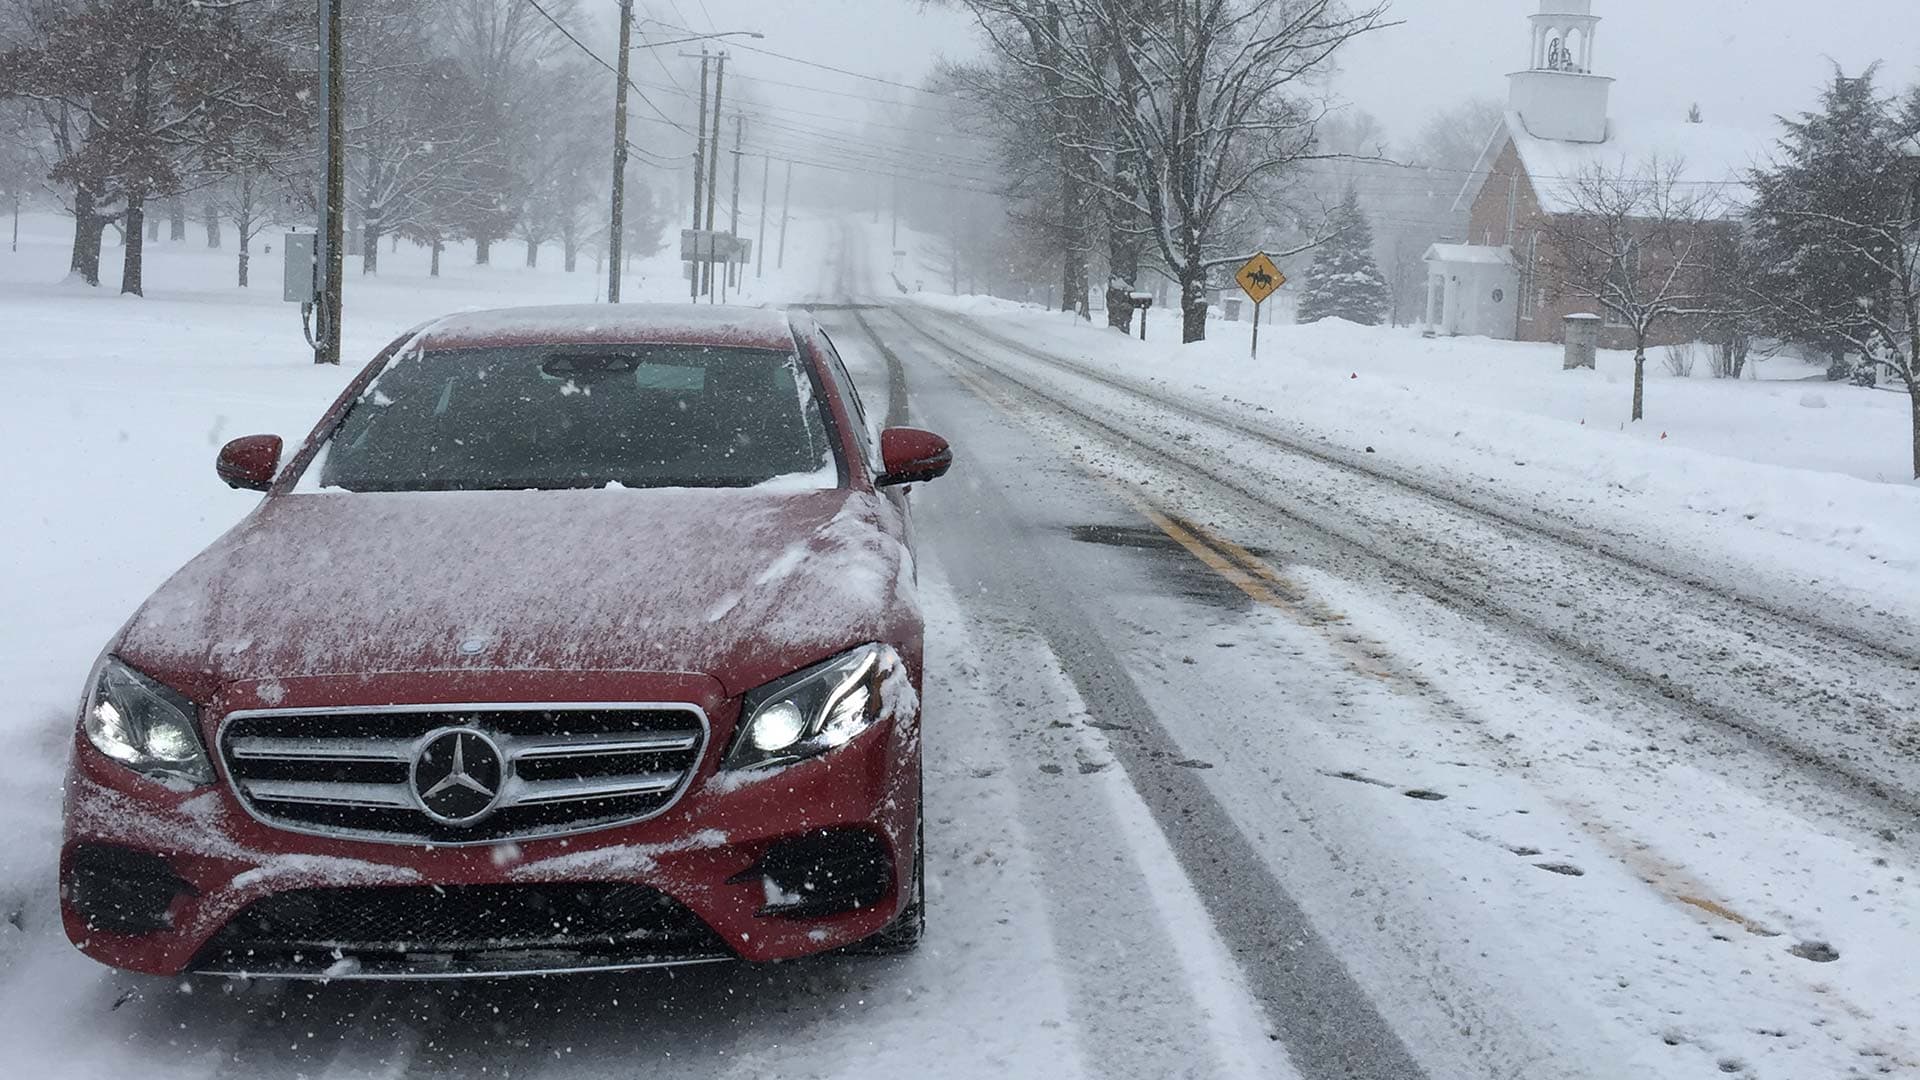 The 2017 Mercedes-Benz E300 4Matic May Be the Winter Car For You